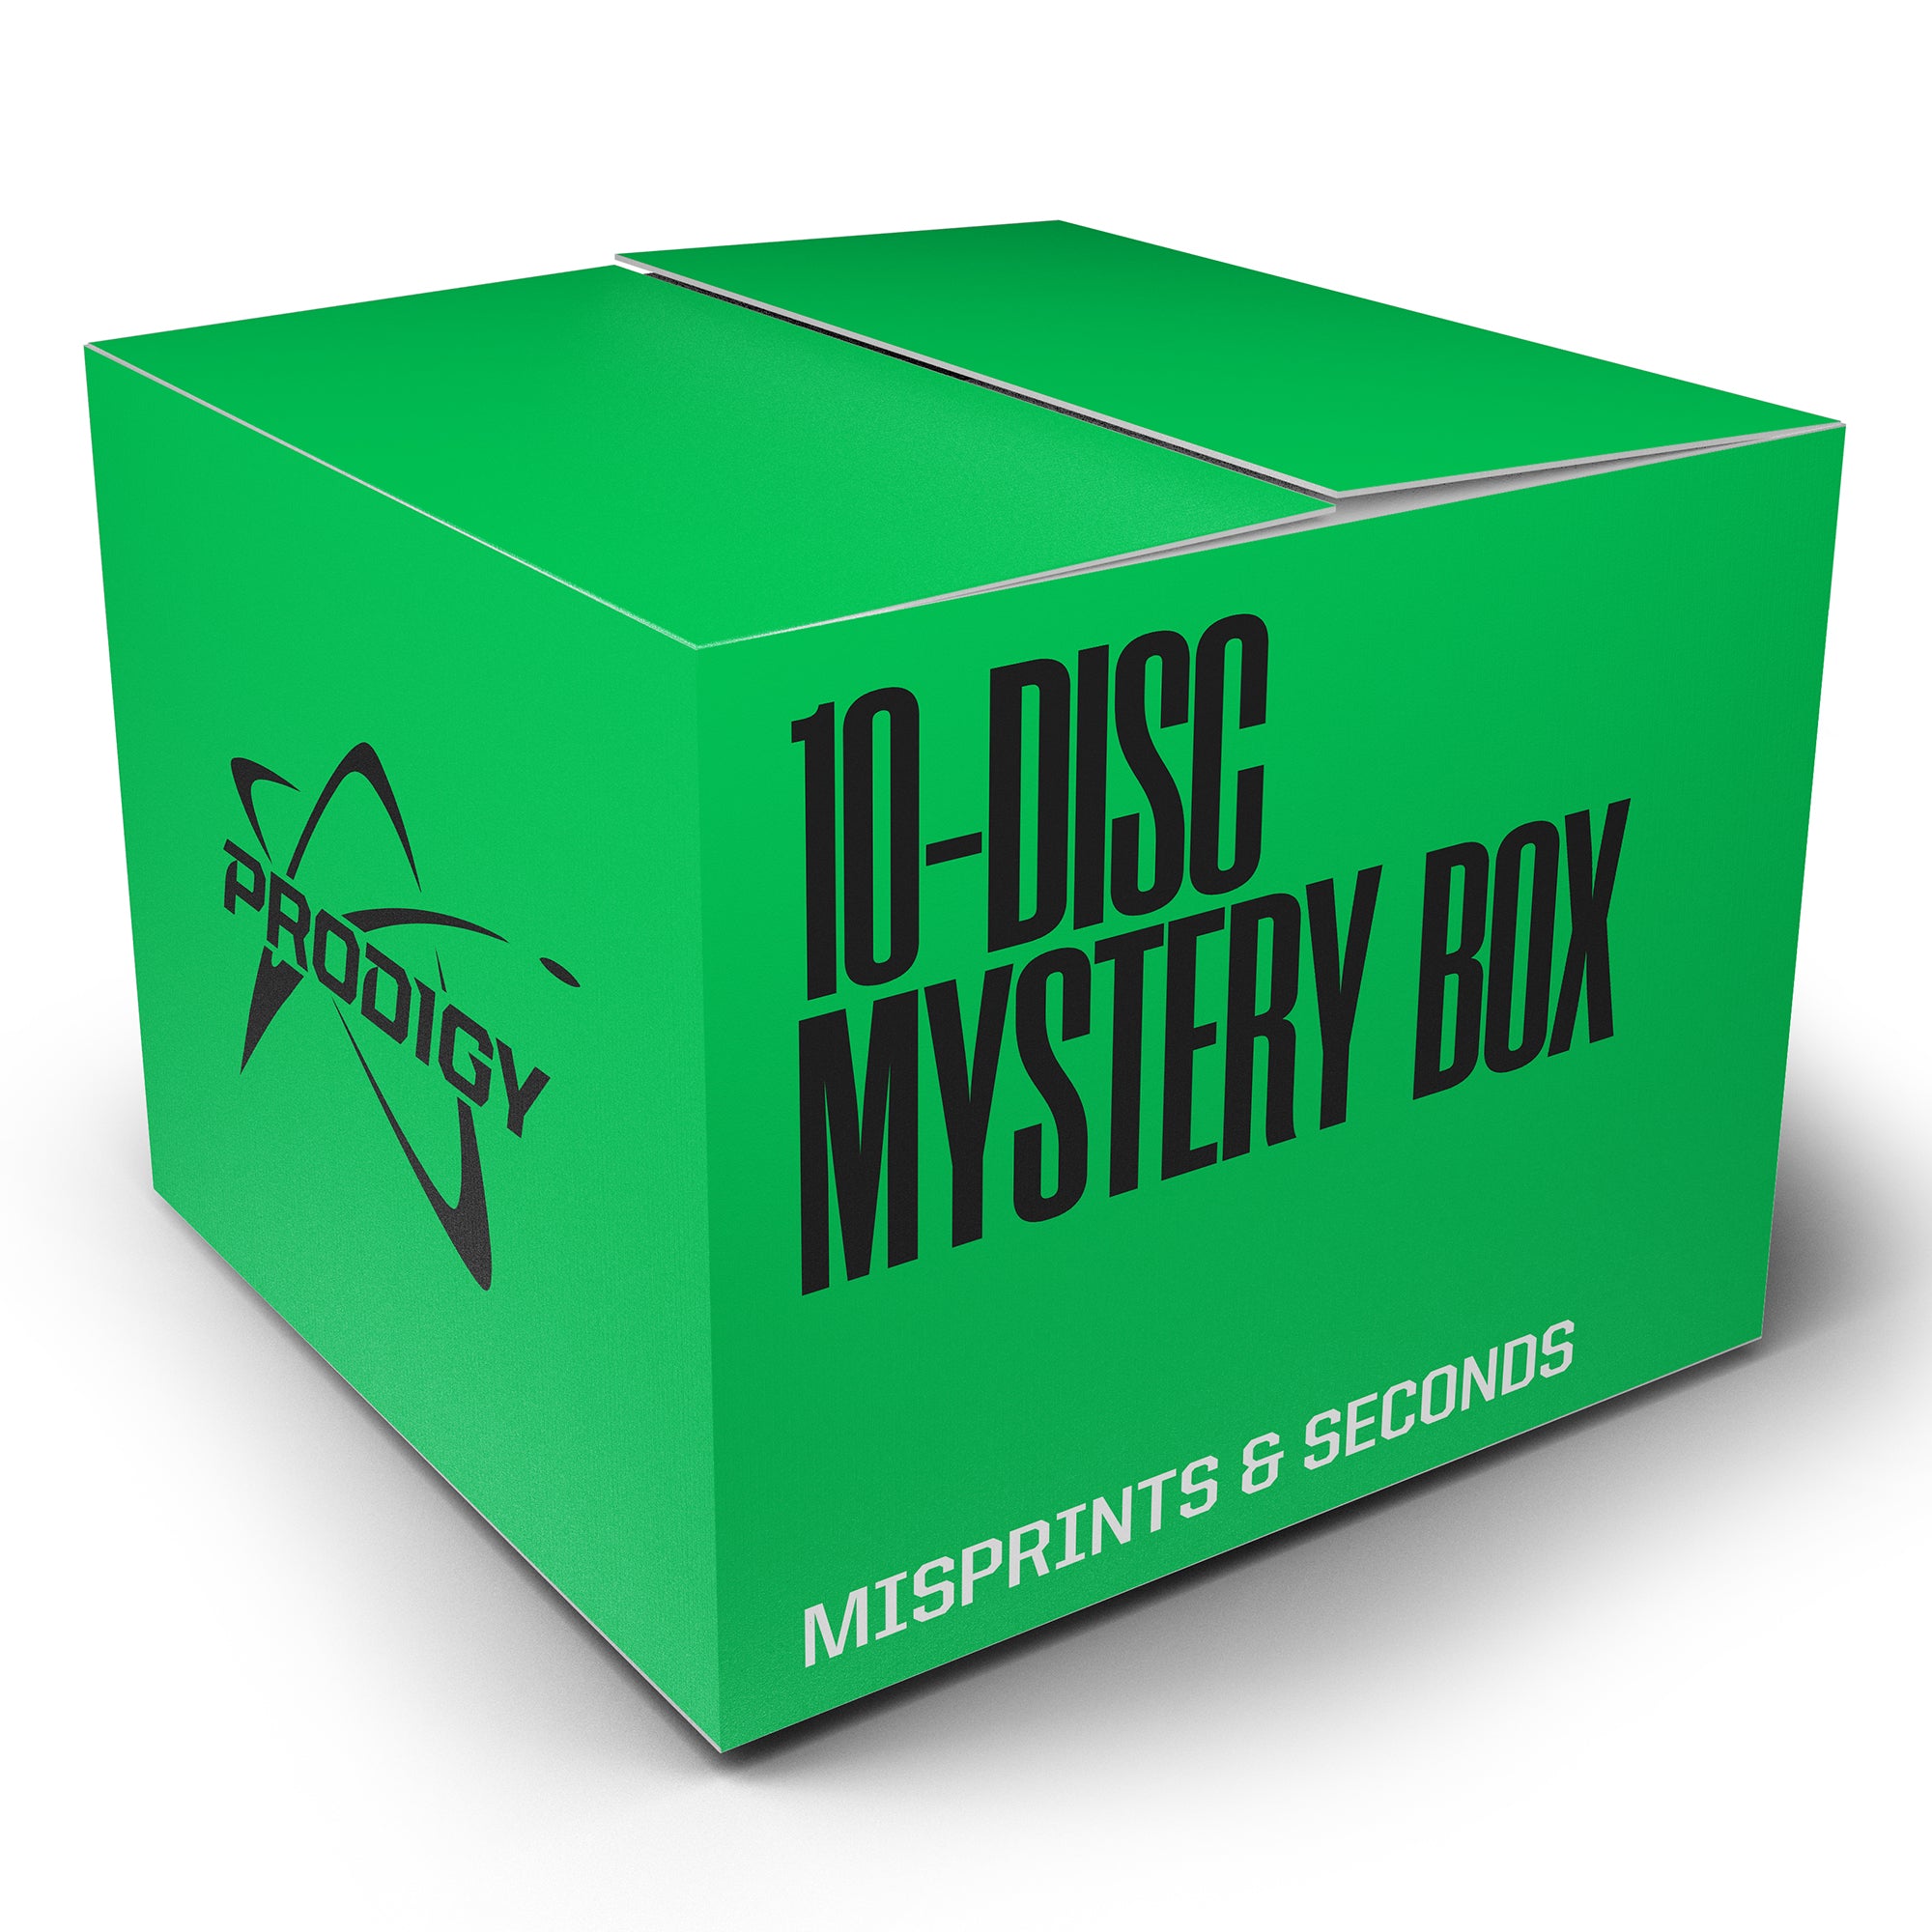 Ordered two 'mystery boxes' from Canadian retailers, who did it